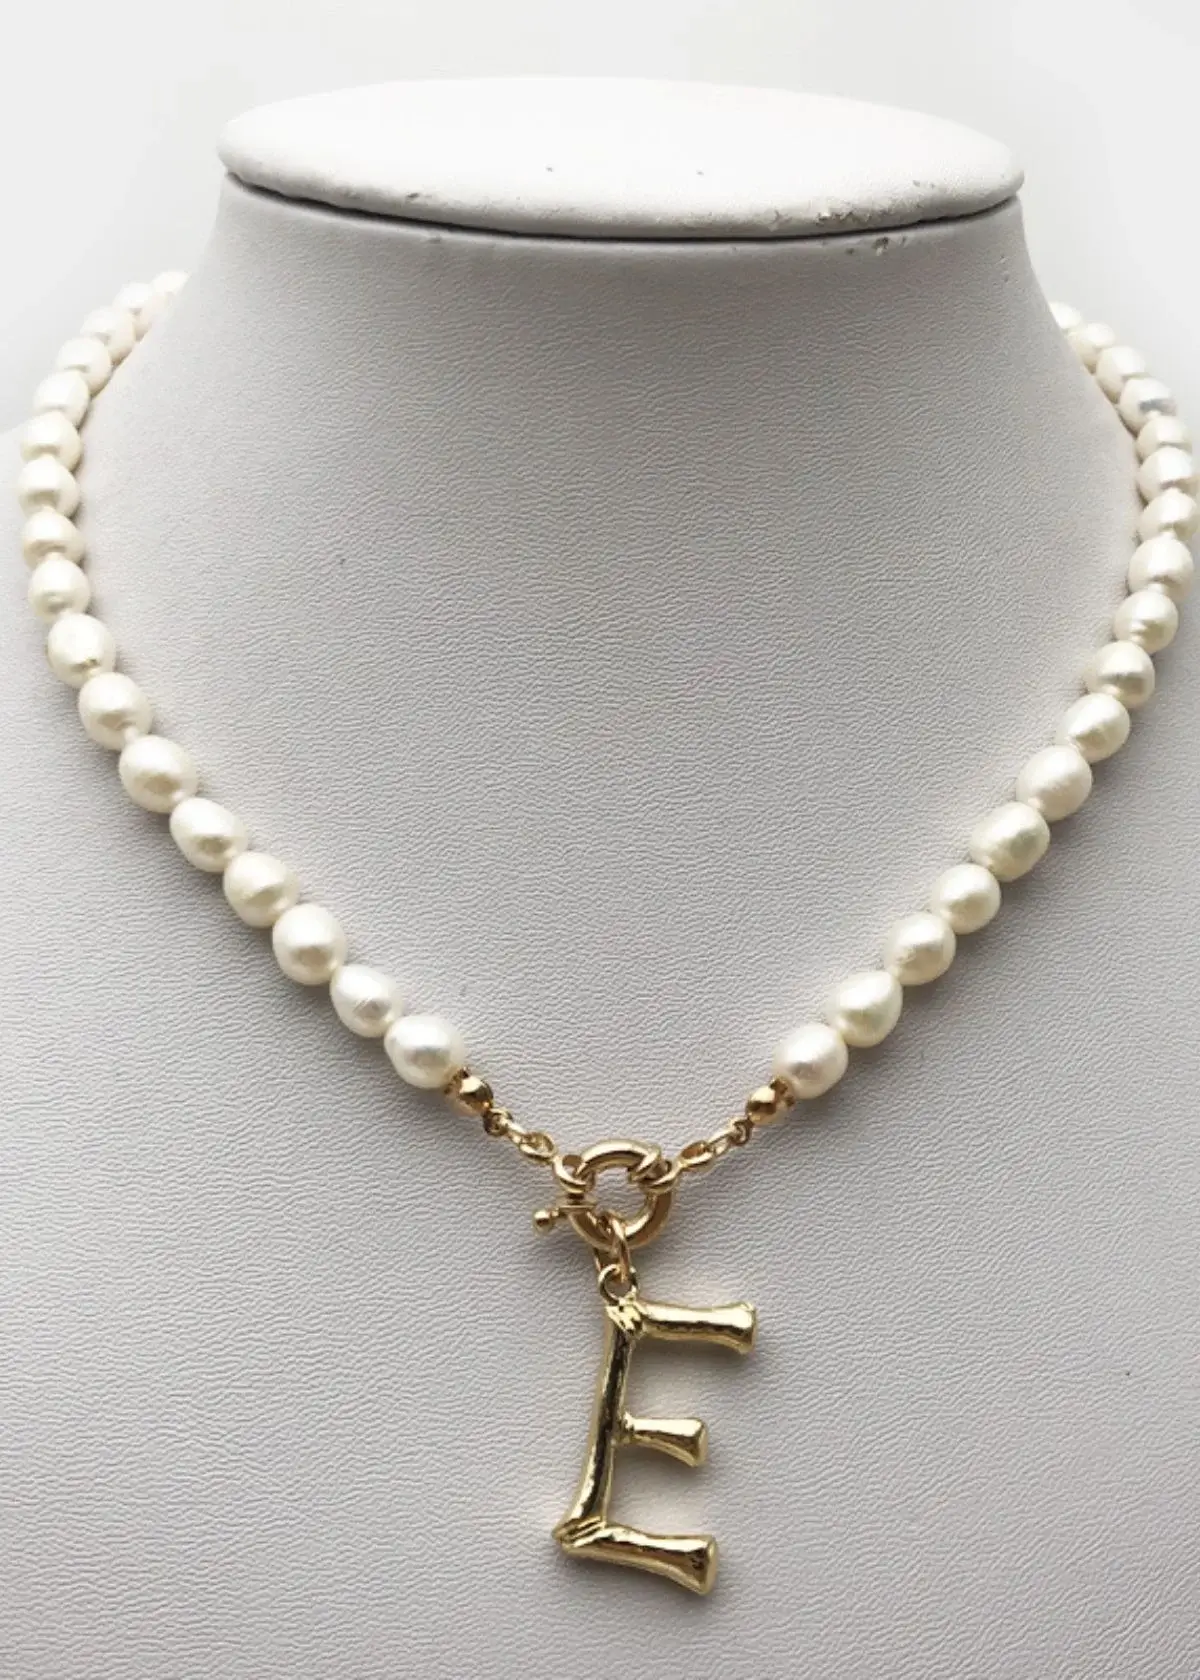 How to choose the right pearl initial necklace?